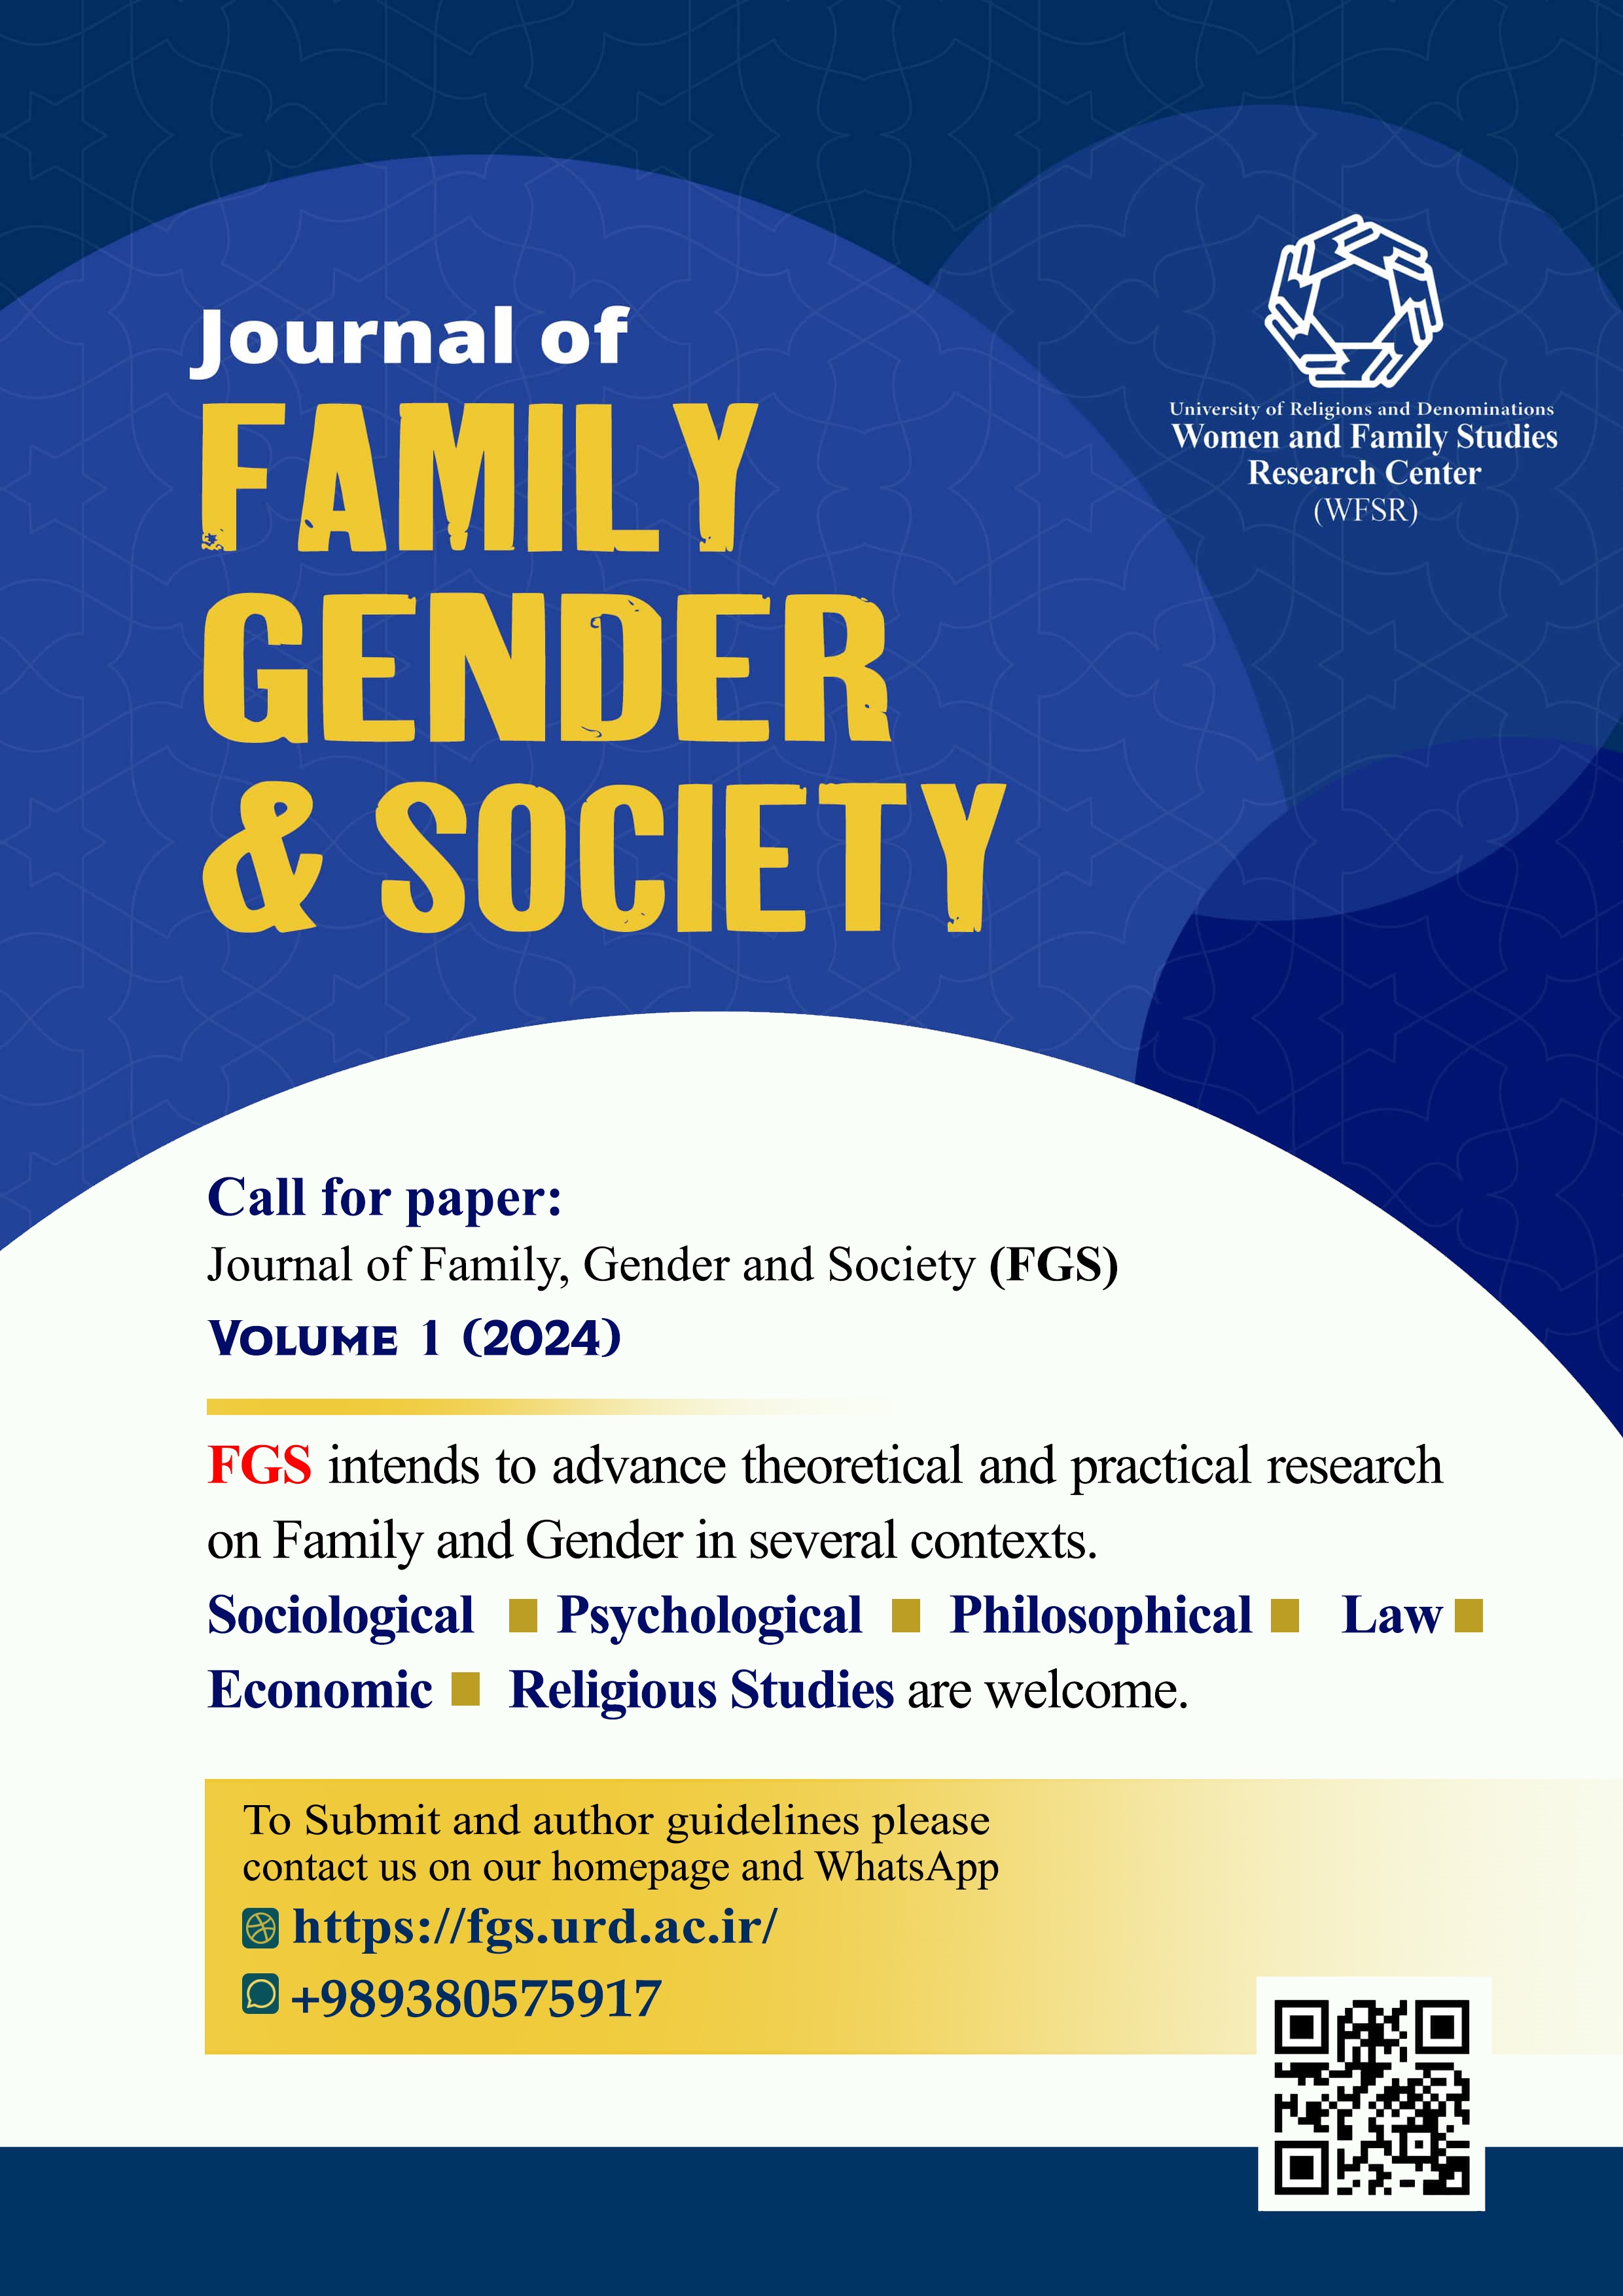 Family, Gender and Society